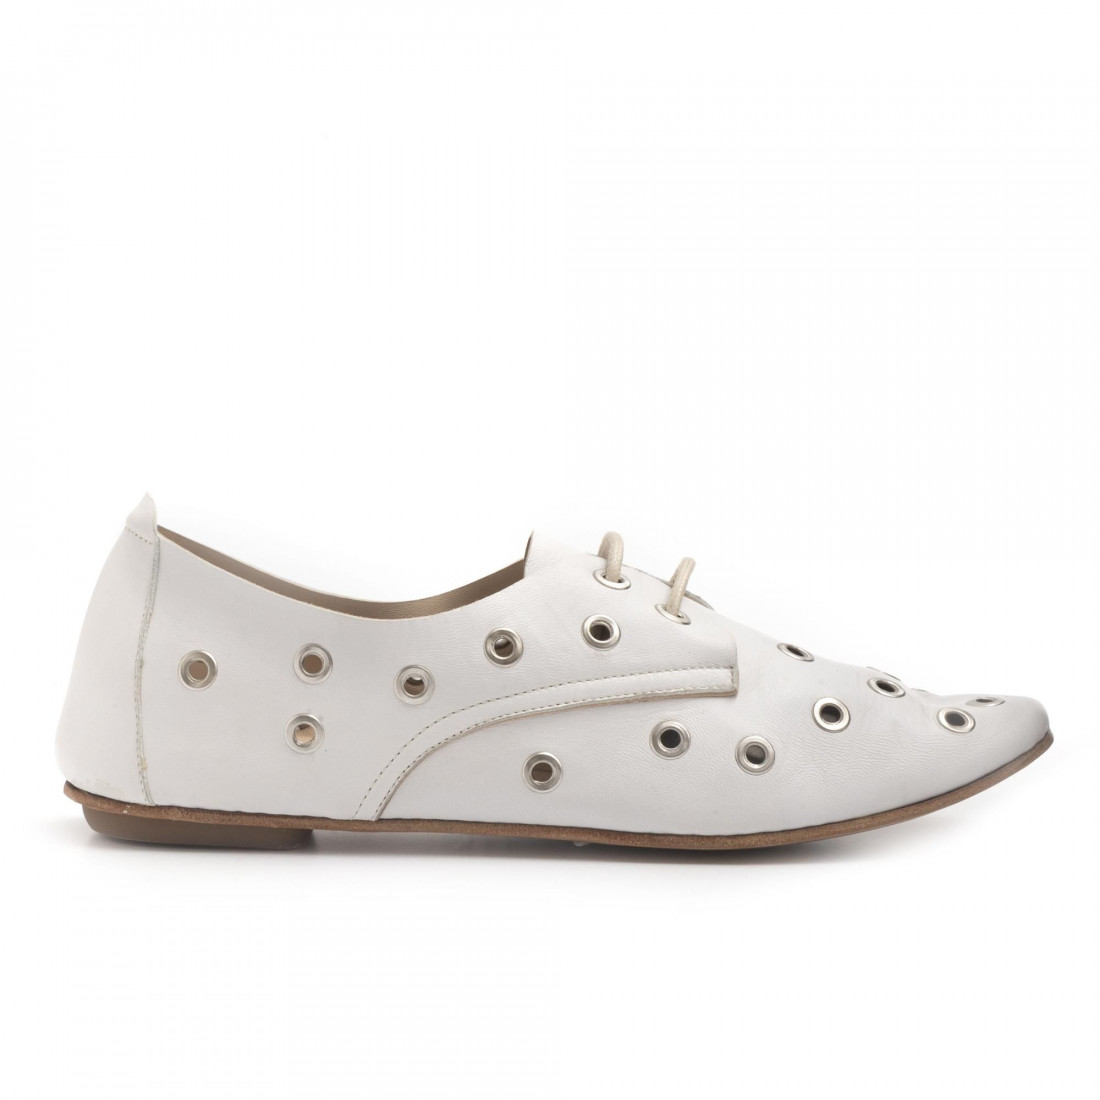 White lace up shoes in perfored leather